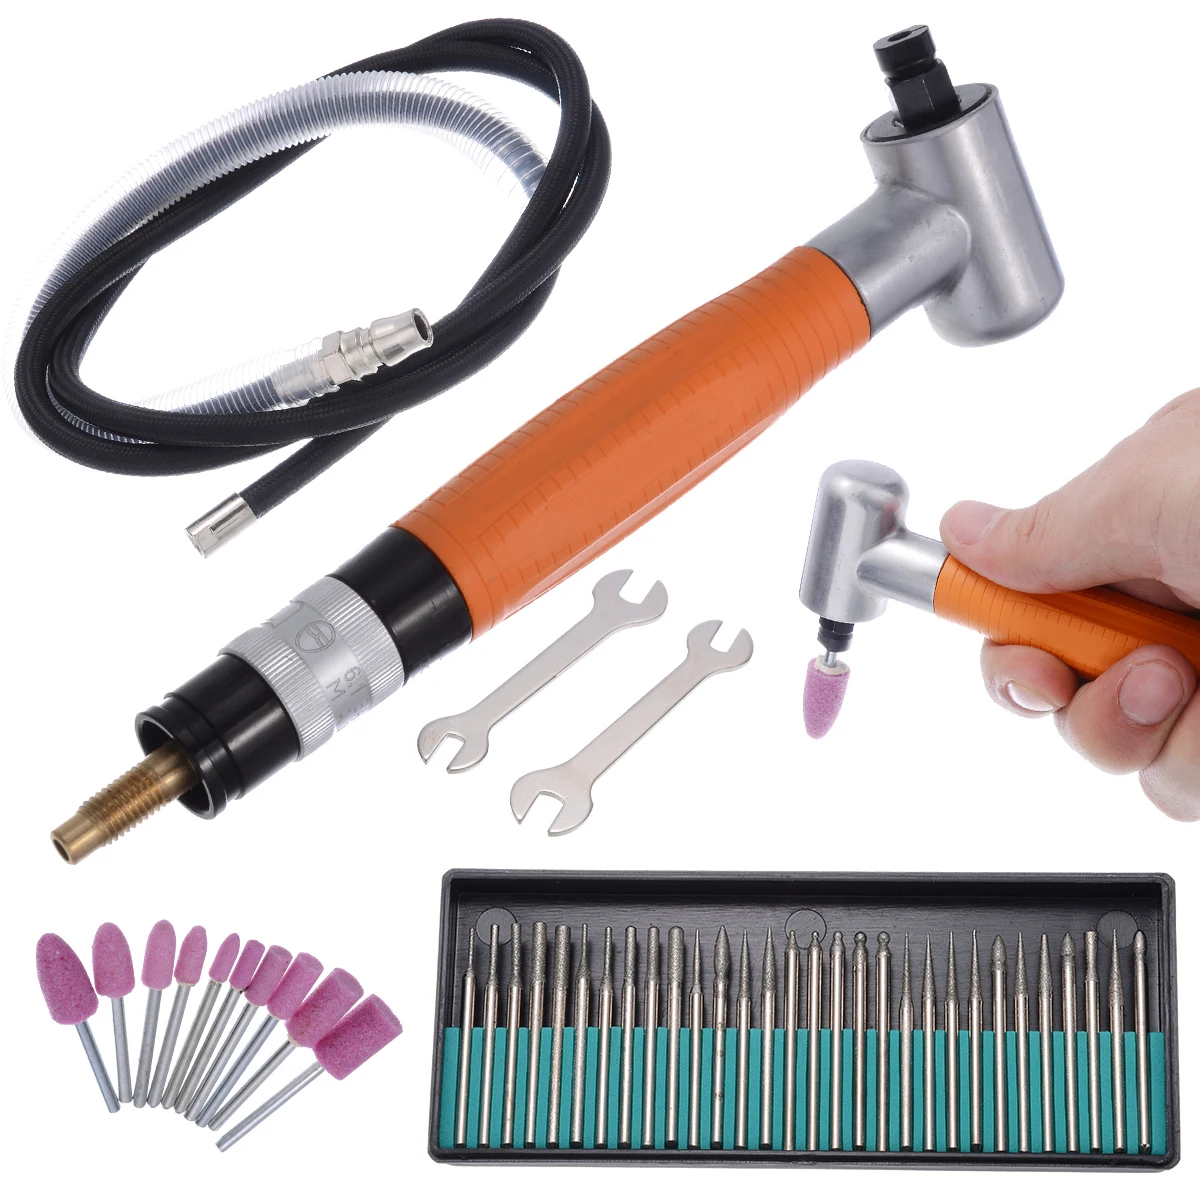 3mm 90 Degree Angle Air Die Grinder Pneumatic Micro Grinder Grinding Polisher Tool Set Cutting Abrasive Pneumatic Tools Mayitr